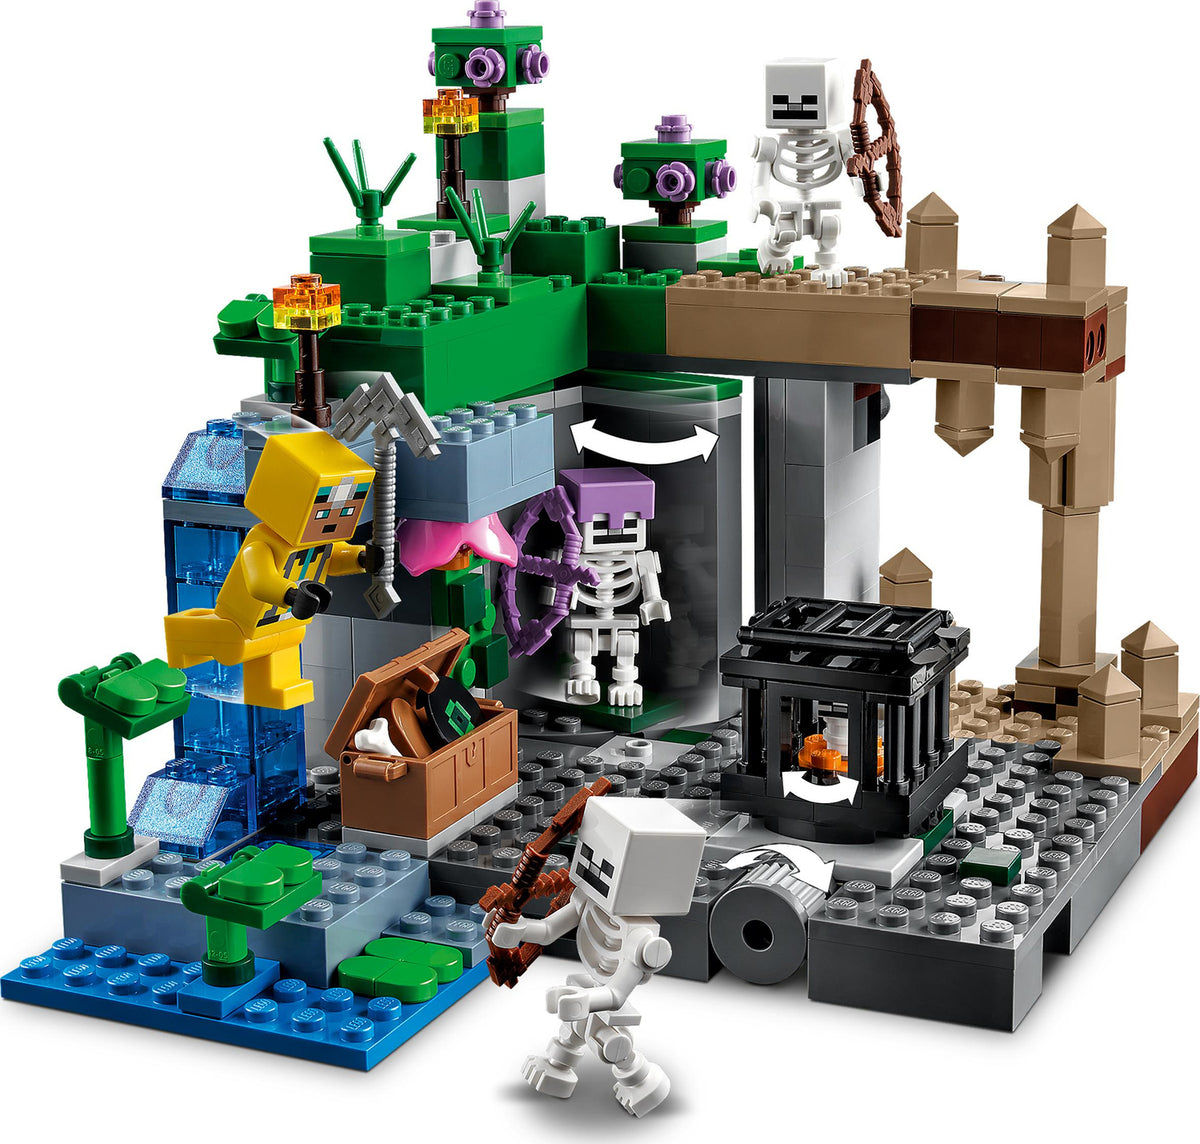 LEGO Minecraft The Skeleton Dungeon Set, 21189 Construction Toy for Kids  with Caves, Mobs and Figures with Crossbow Accessories